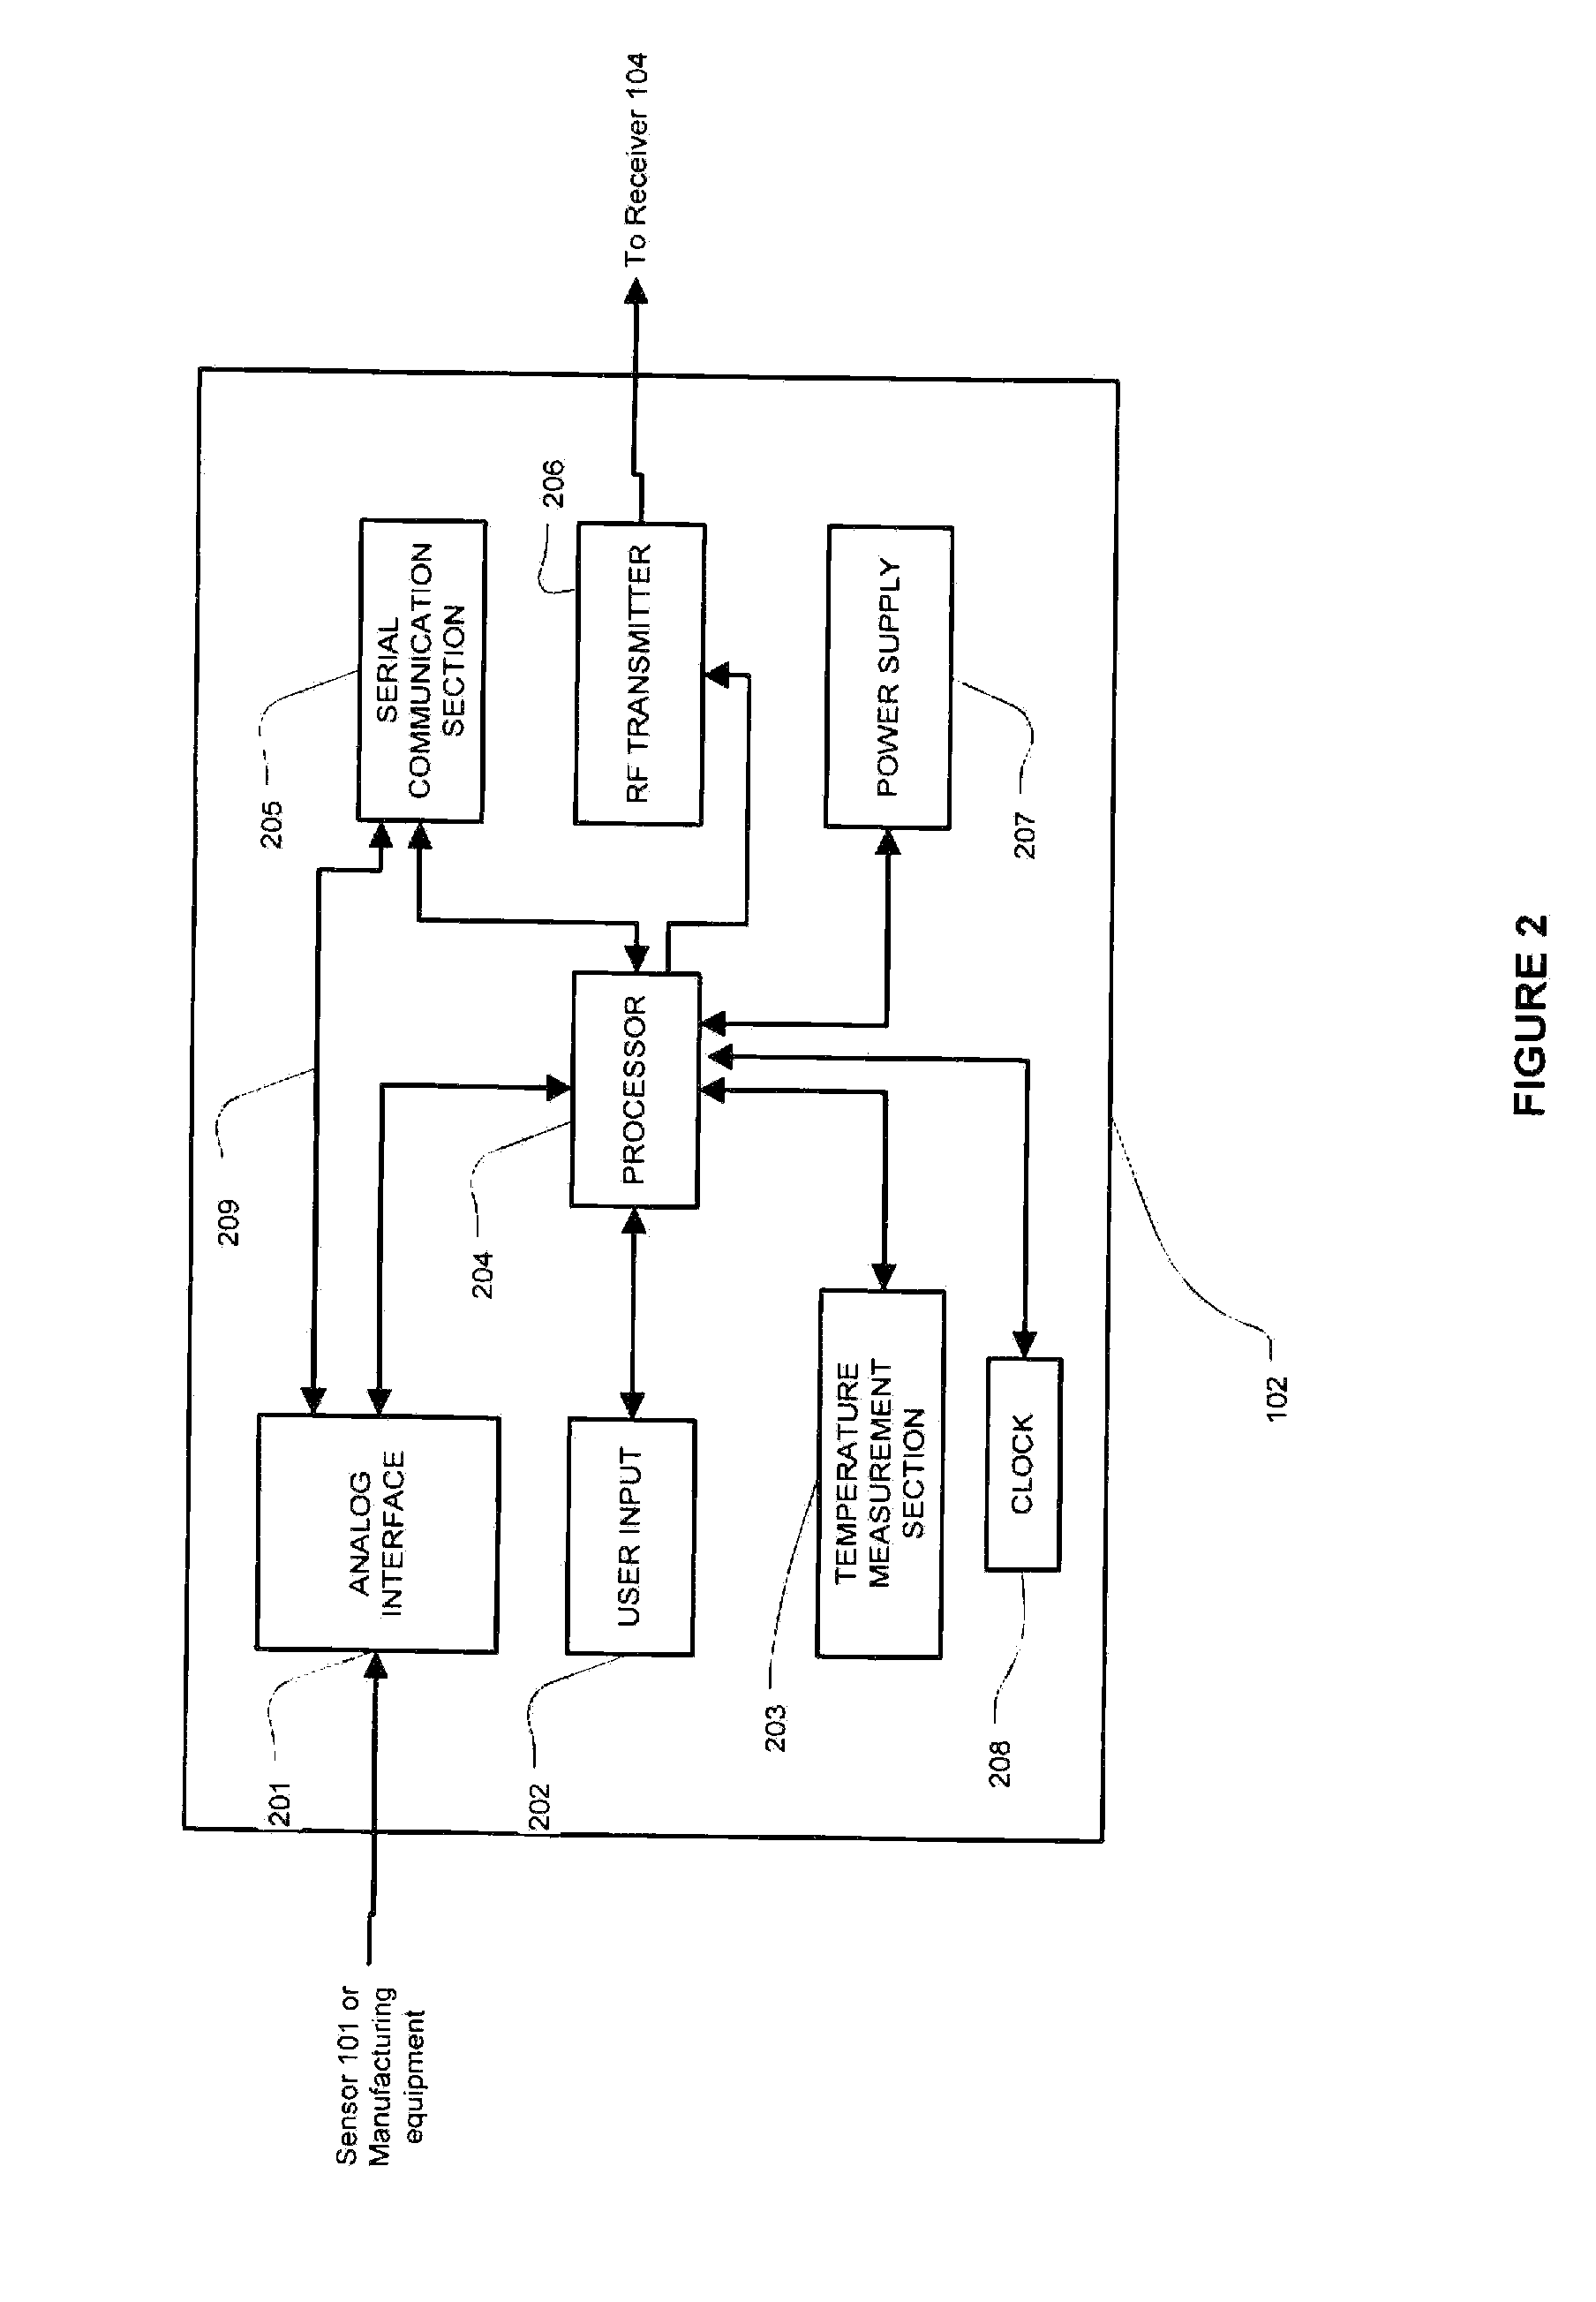 Method and System for Dynamically Updating Calibration Parameters for an Analyte Sensor